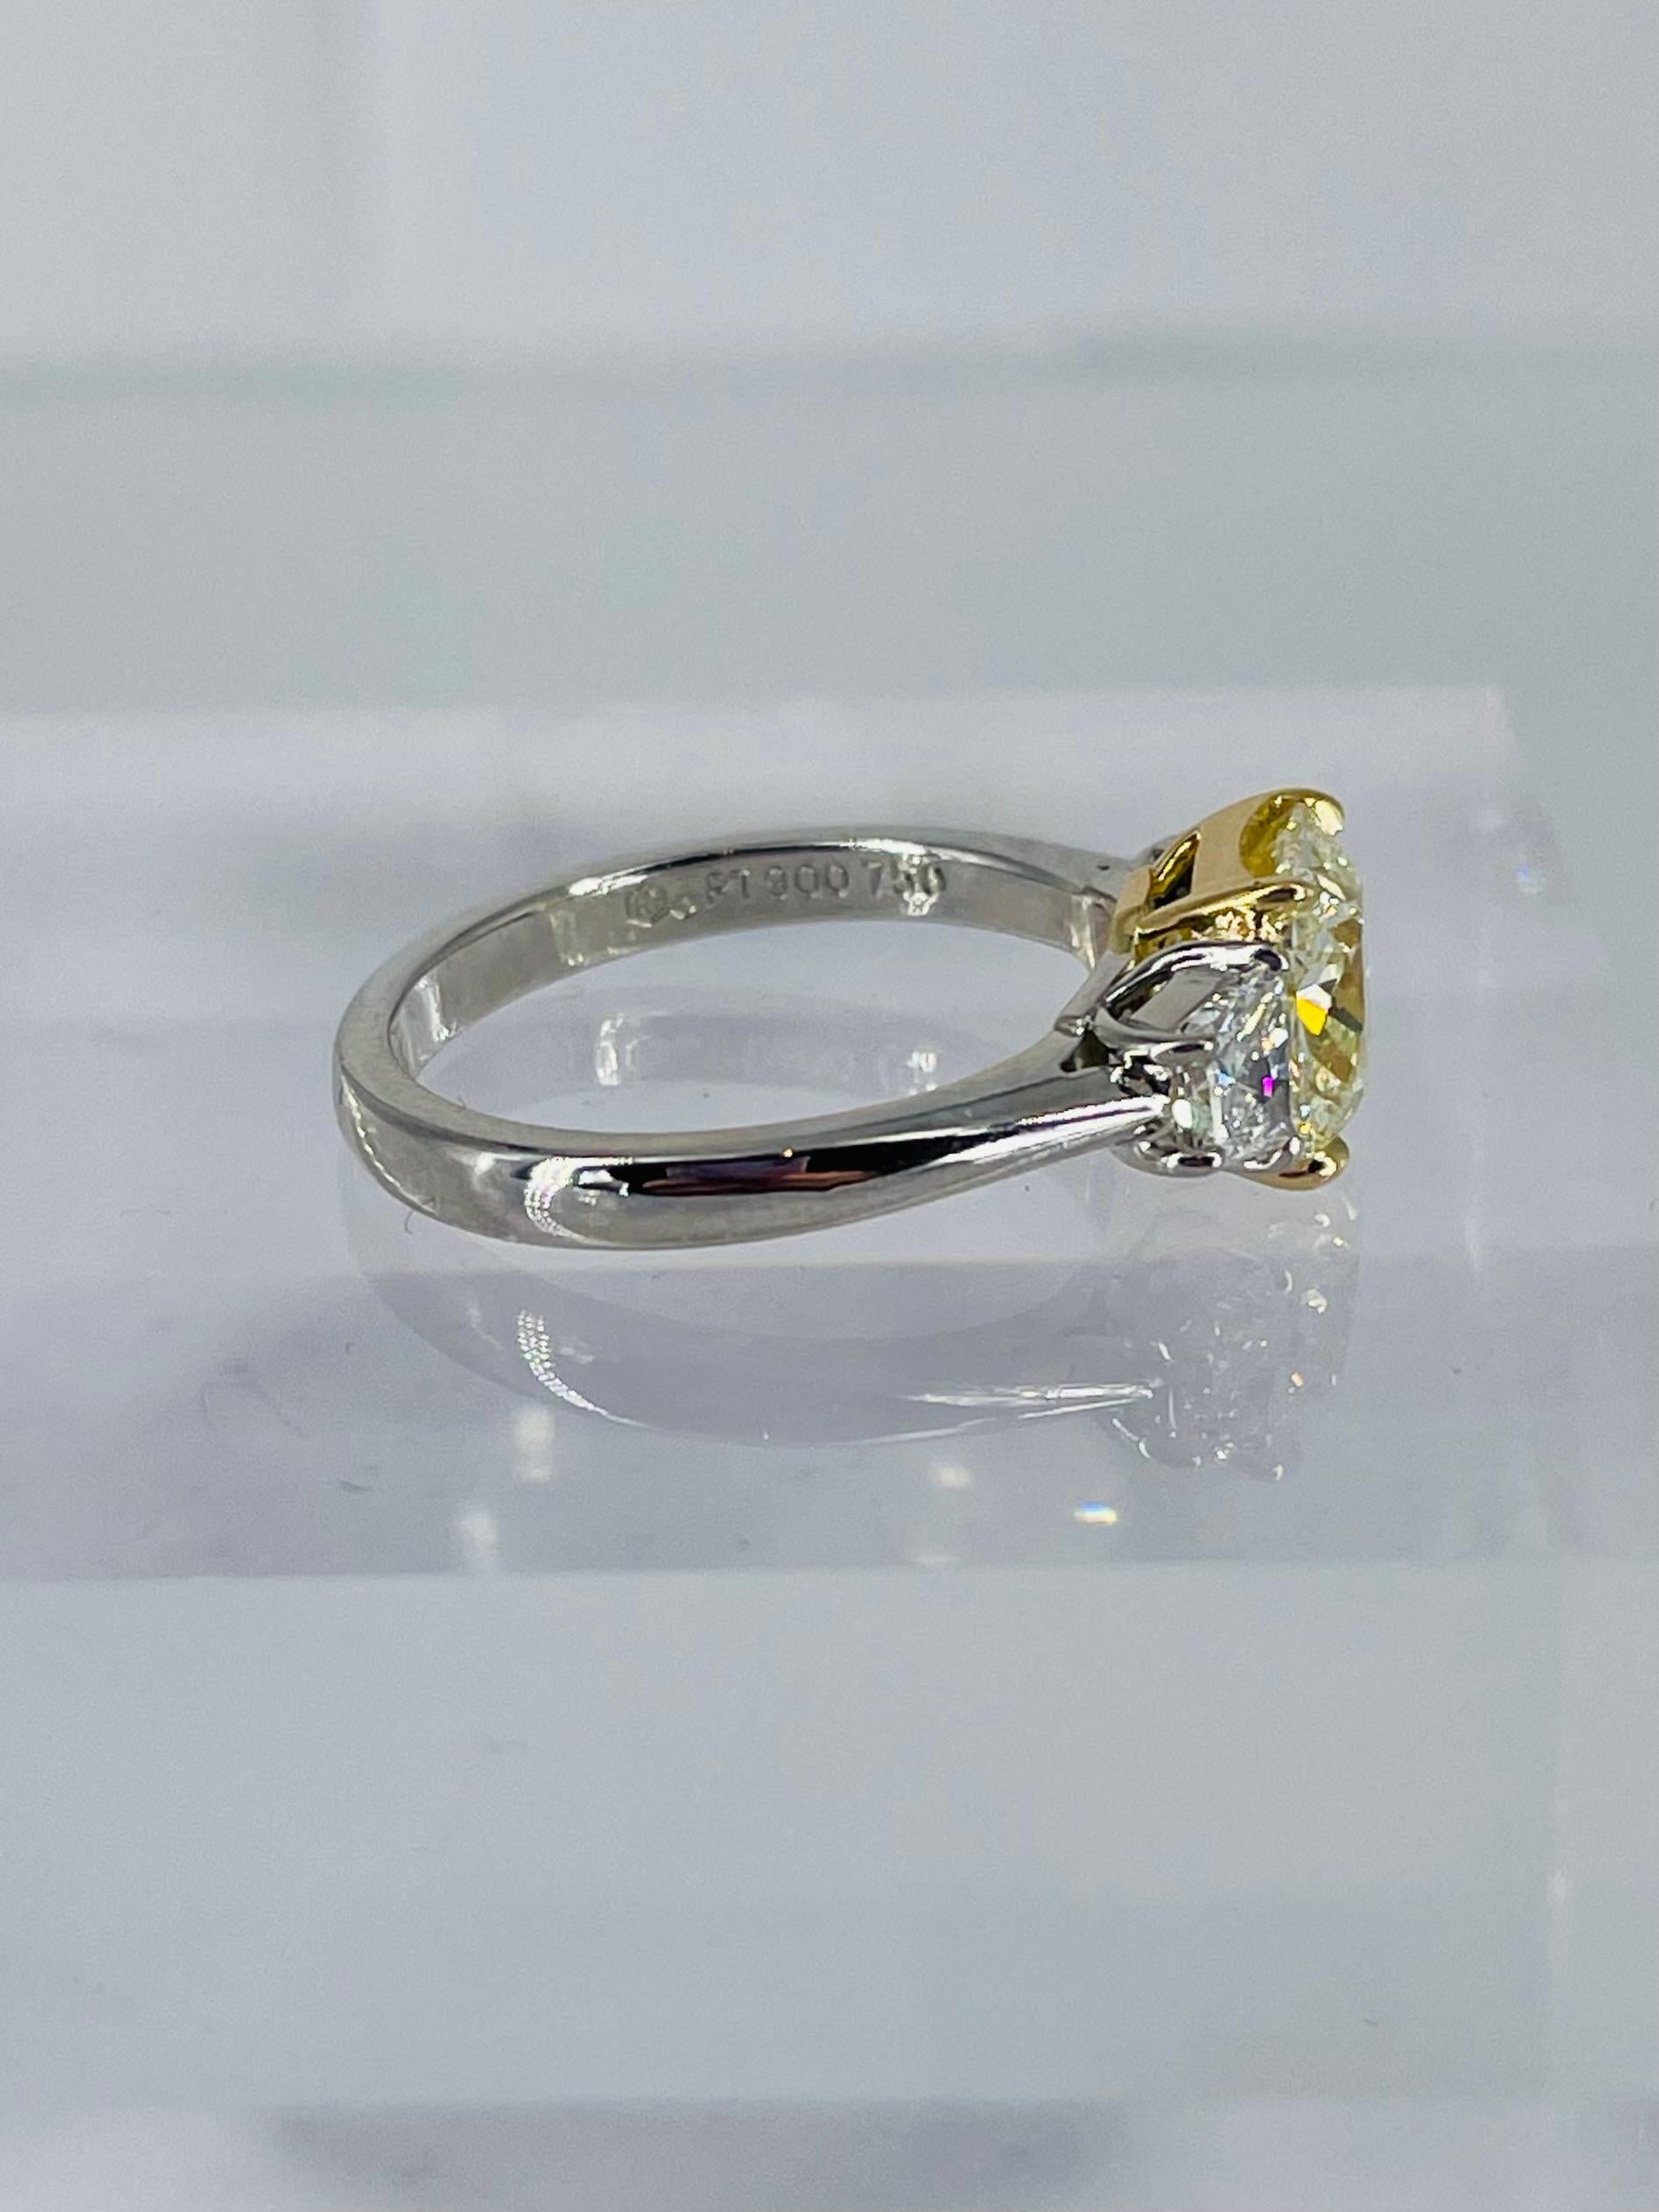 This sweet ring is the perfect combination of sparkle and color! A truly special find, this 2.17 carat cushion is GIA certified as S-T color and VS1 clarity. Set in 18K yellow gold, the diamond has the vibrant color and saturation of a Fancy yellow